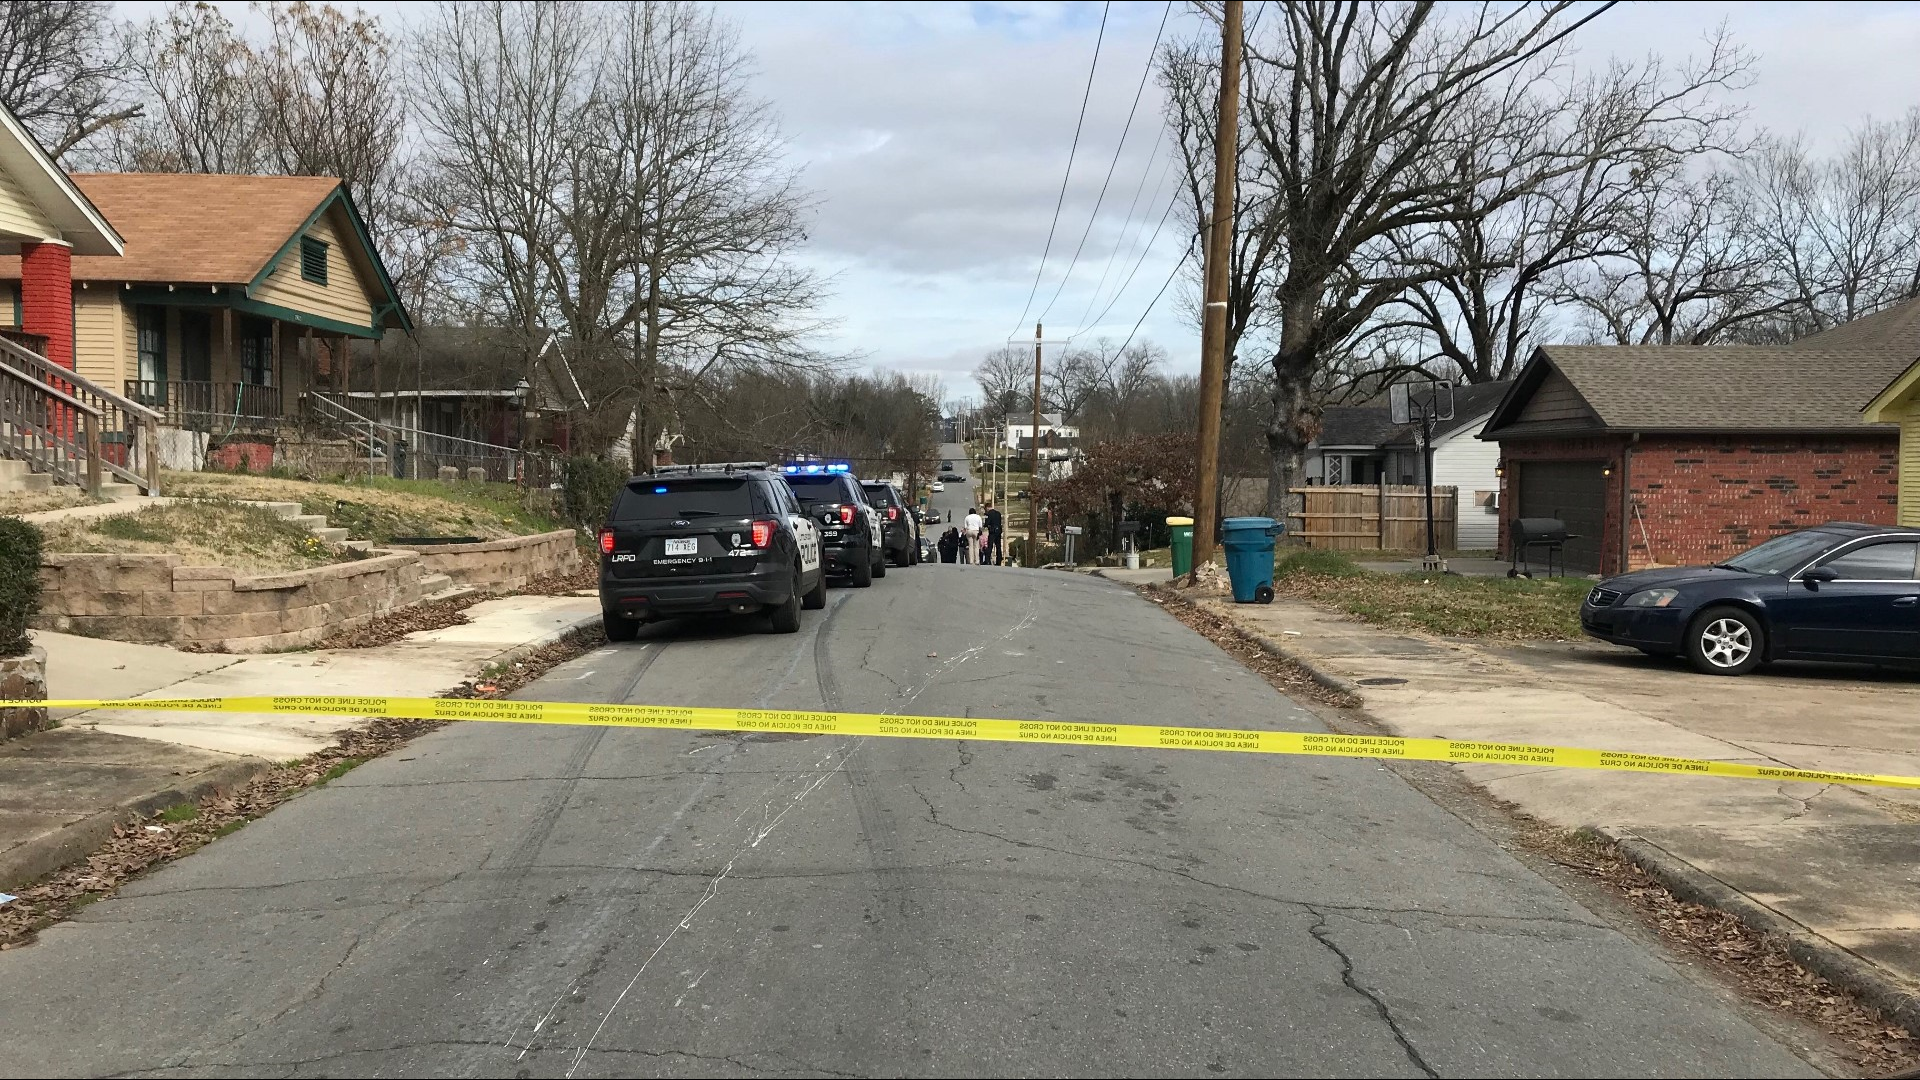 According to the Little Rock Police Department, police responded to 1905 Booker Street and found a man suffering from a gunshot wound.